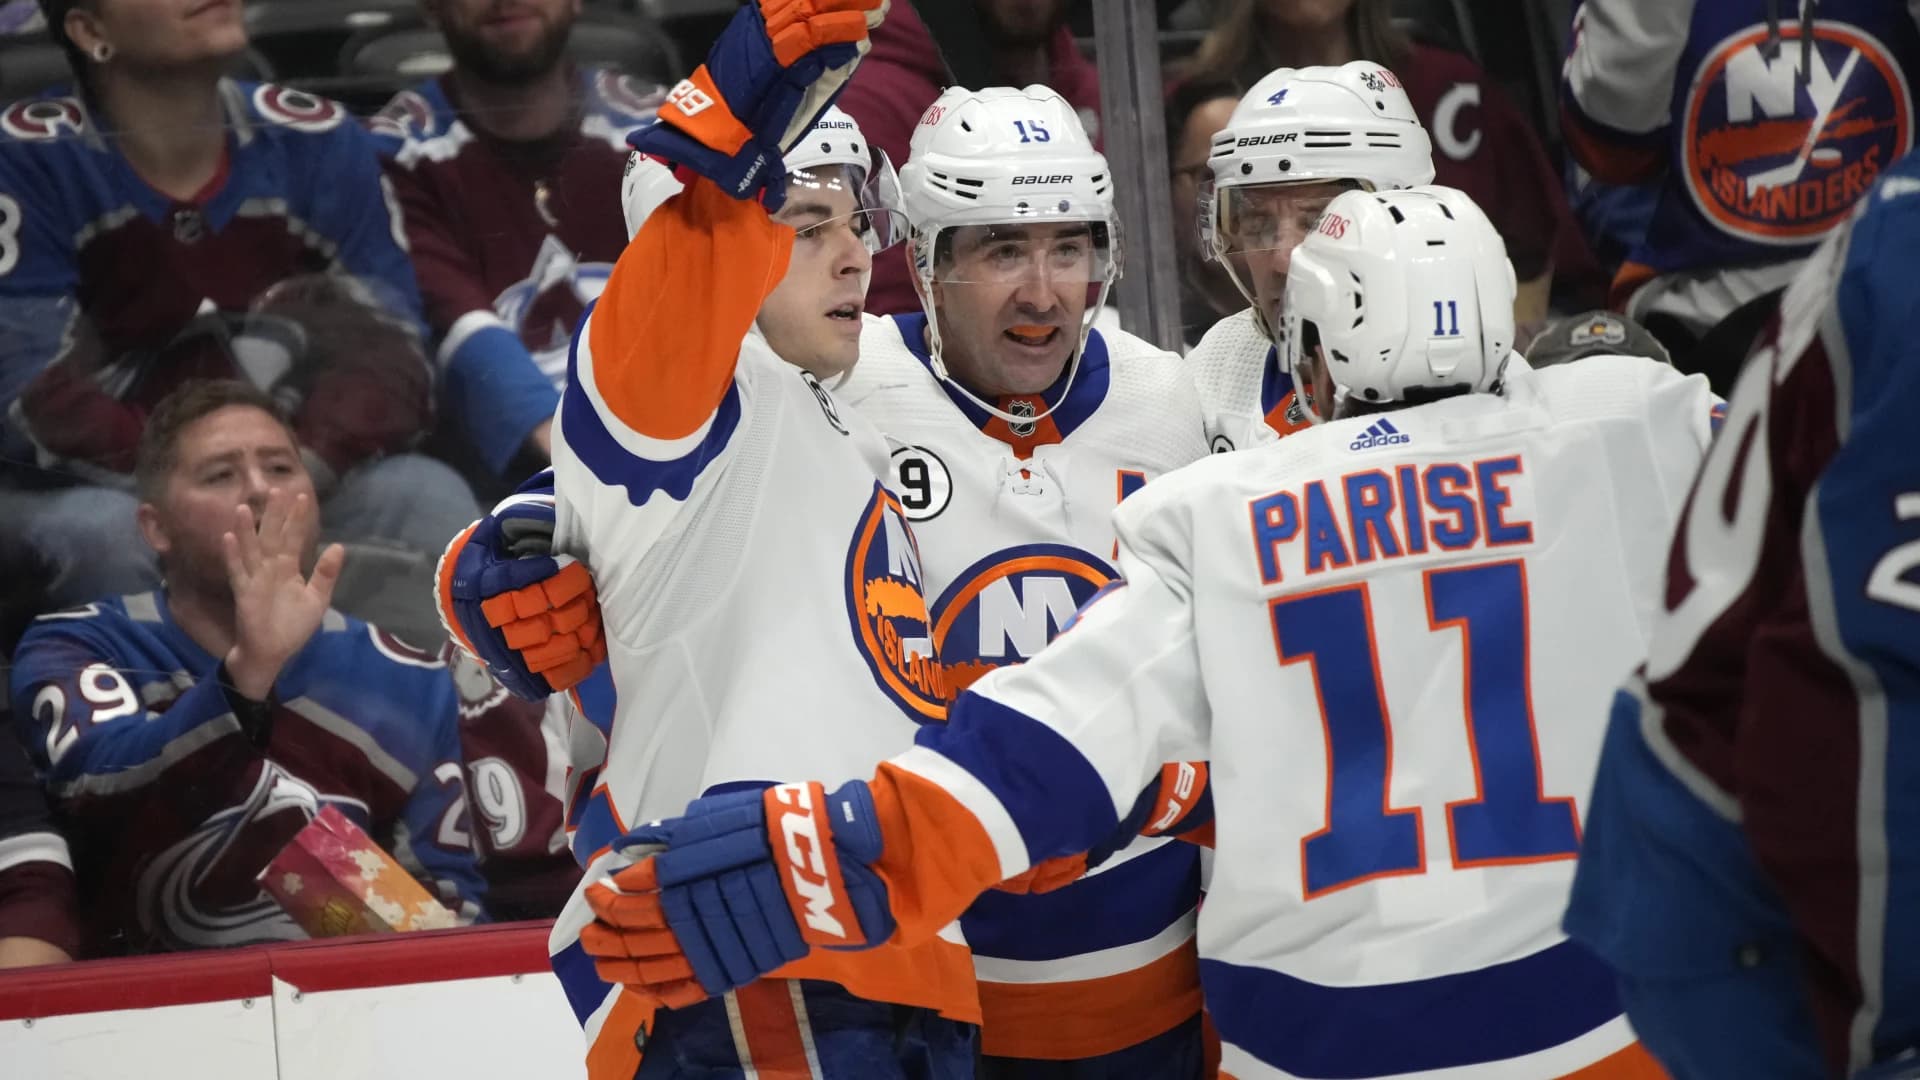 ‘It’s home for me’ - Clutterbuck, Parise ink extensions with Islanders